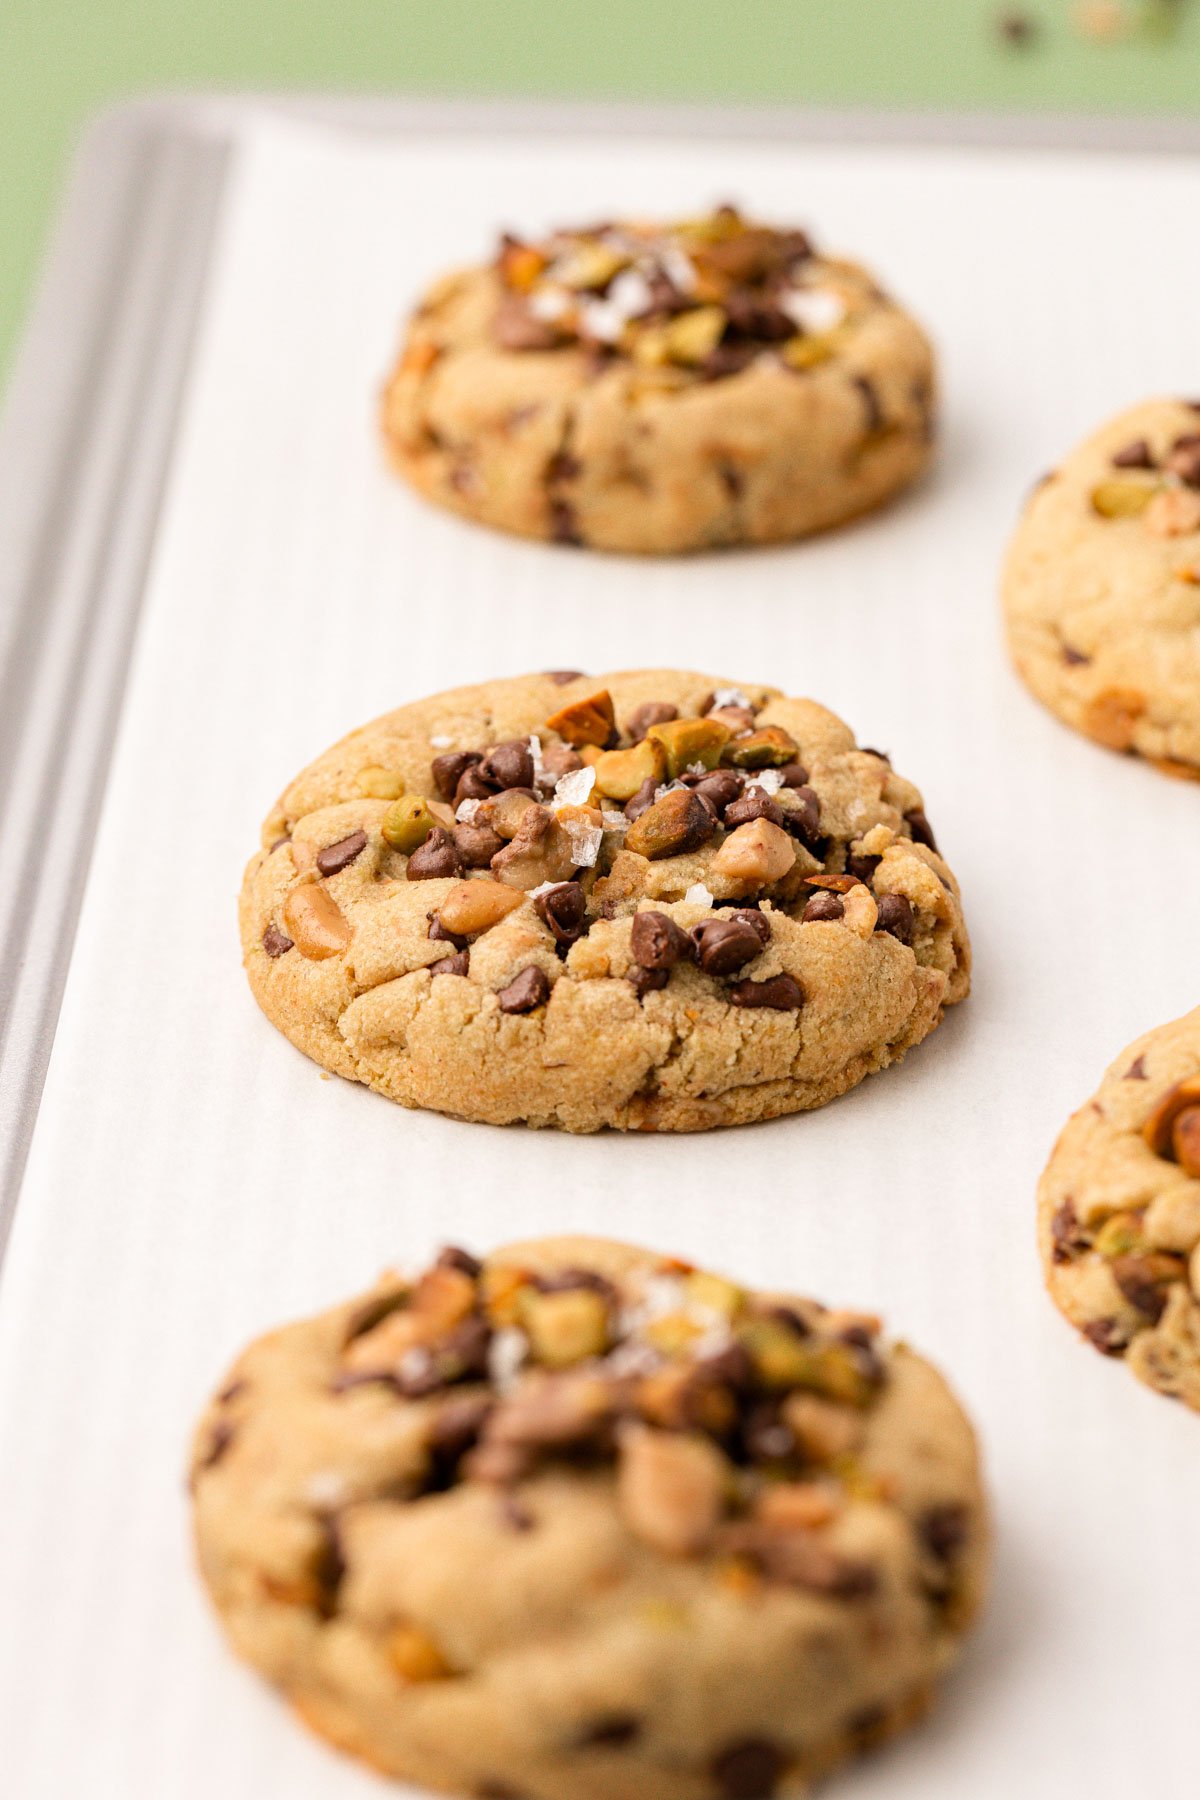 Pistachio Toffee and Chocolate Chip Cookies on a white parchment paper.